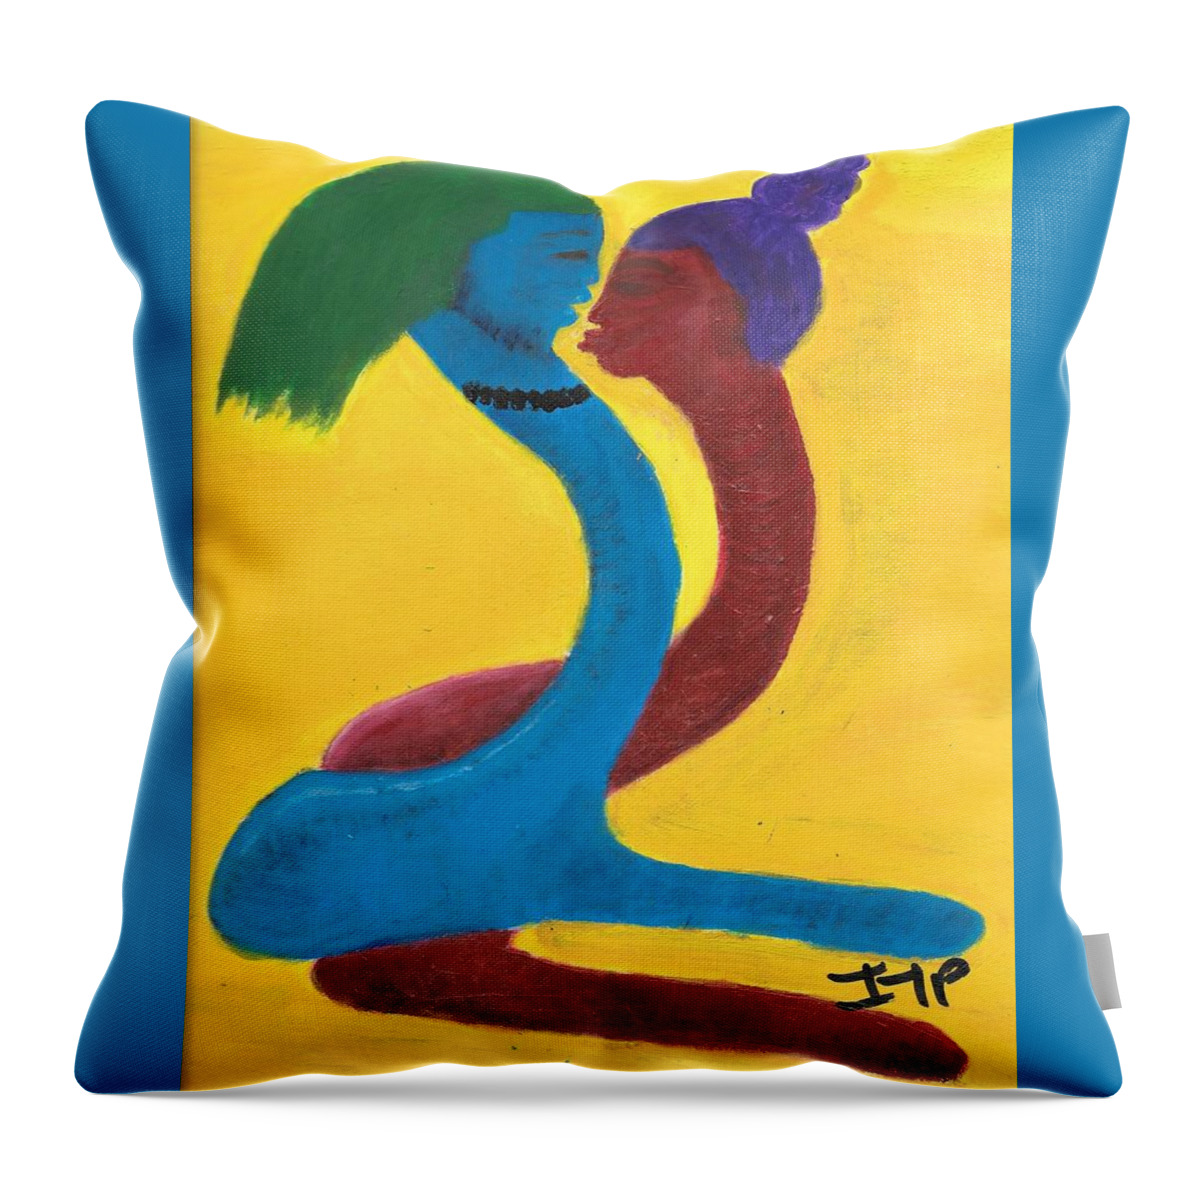 Man Throw Pillow featuring the painting Fleshing by Esoteric Gardens KN